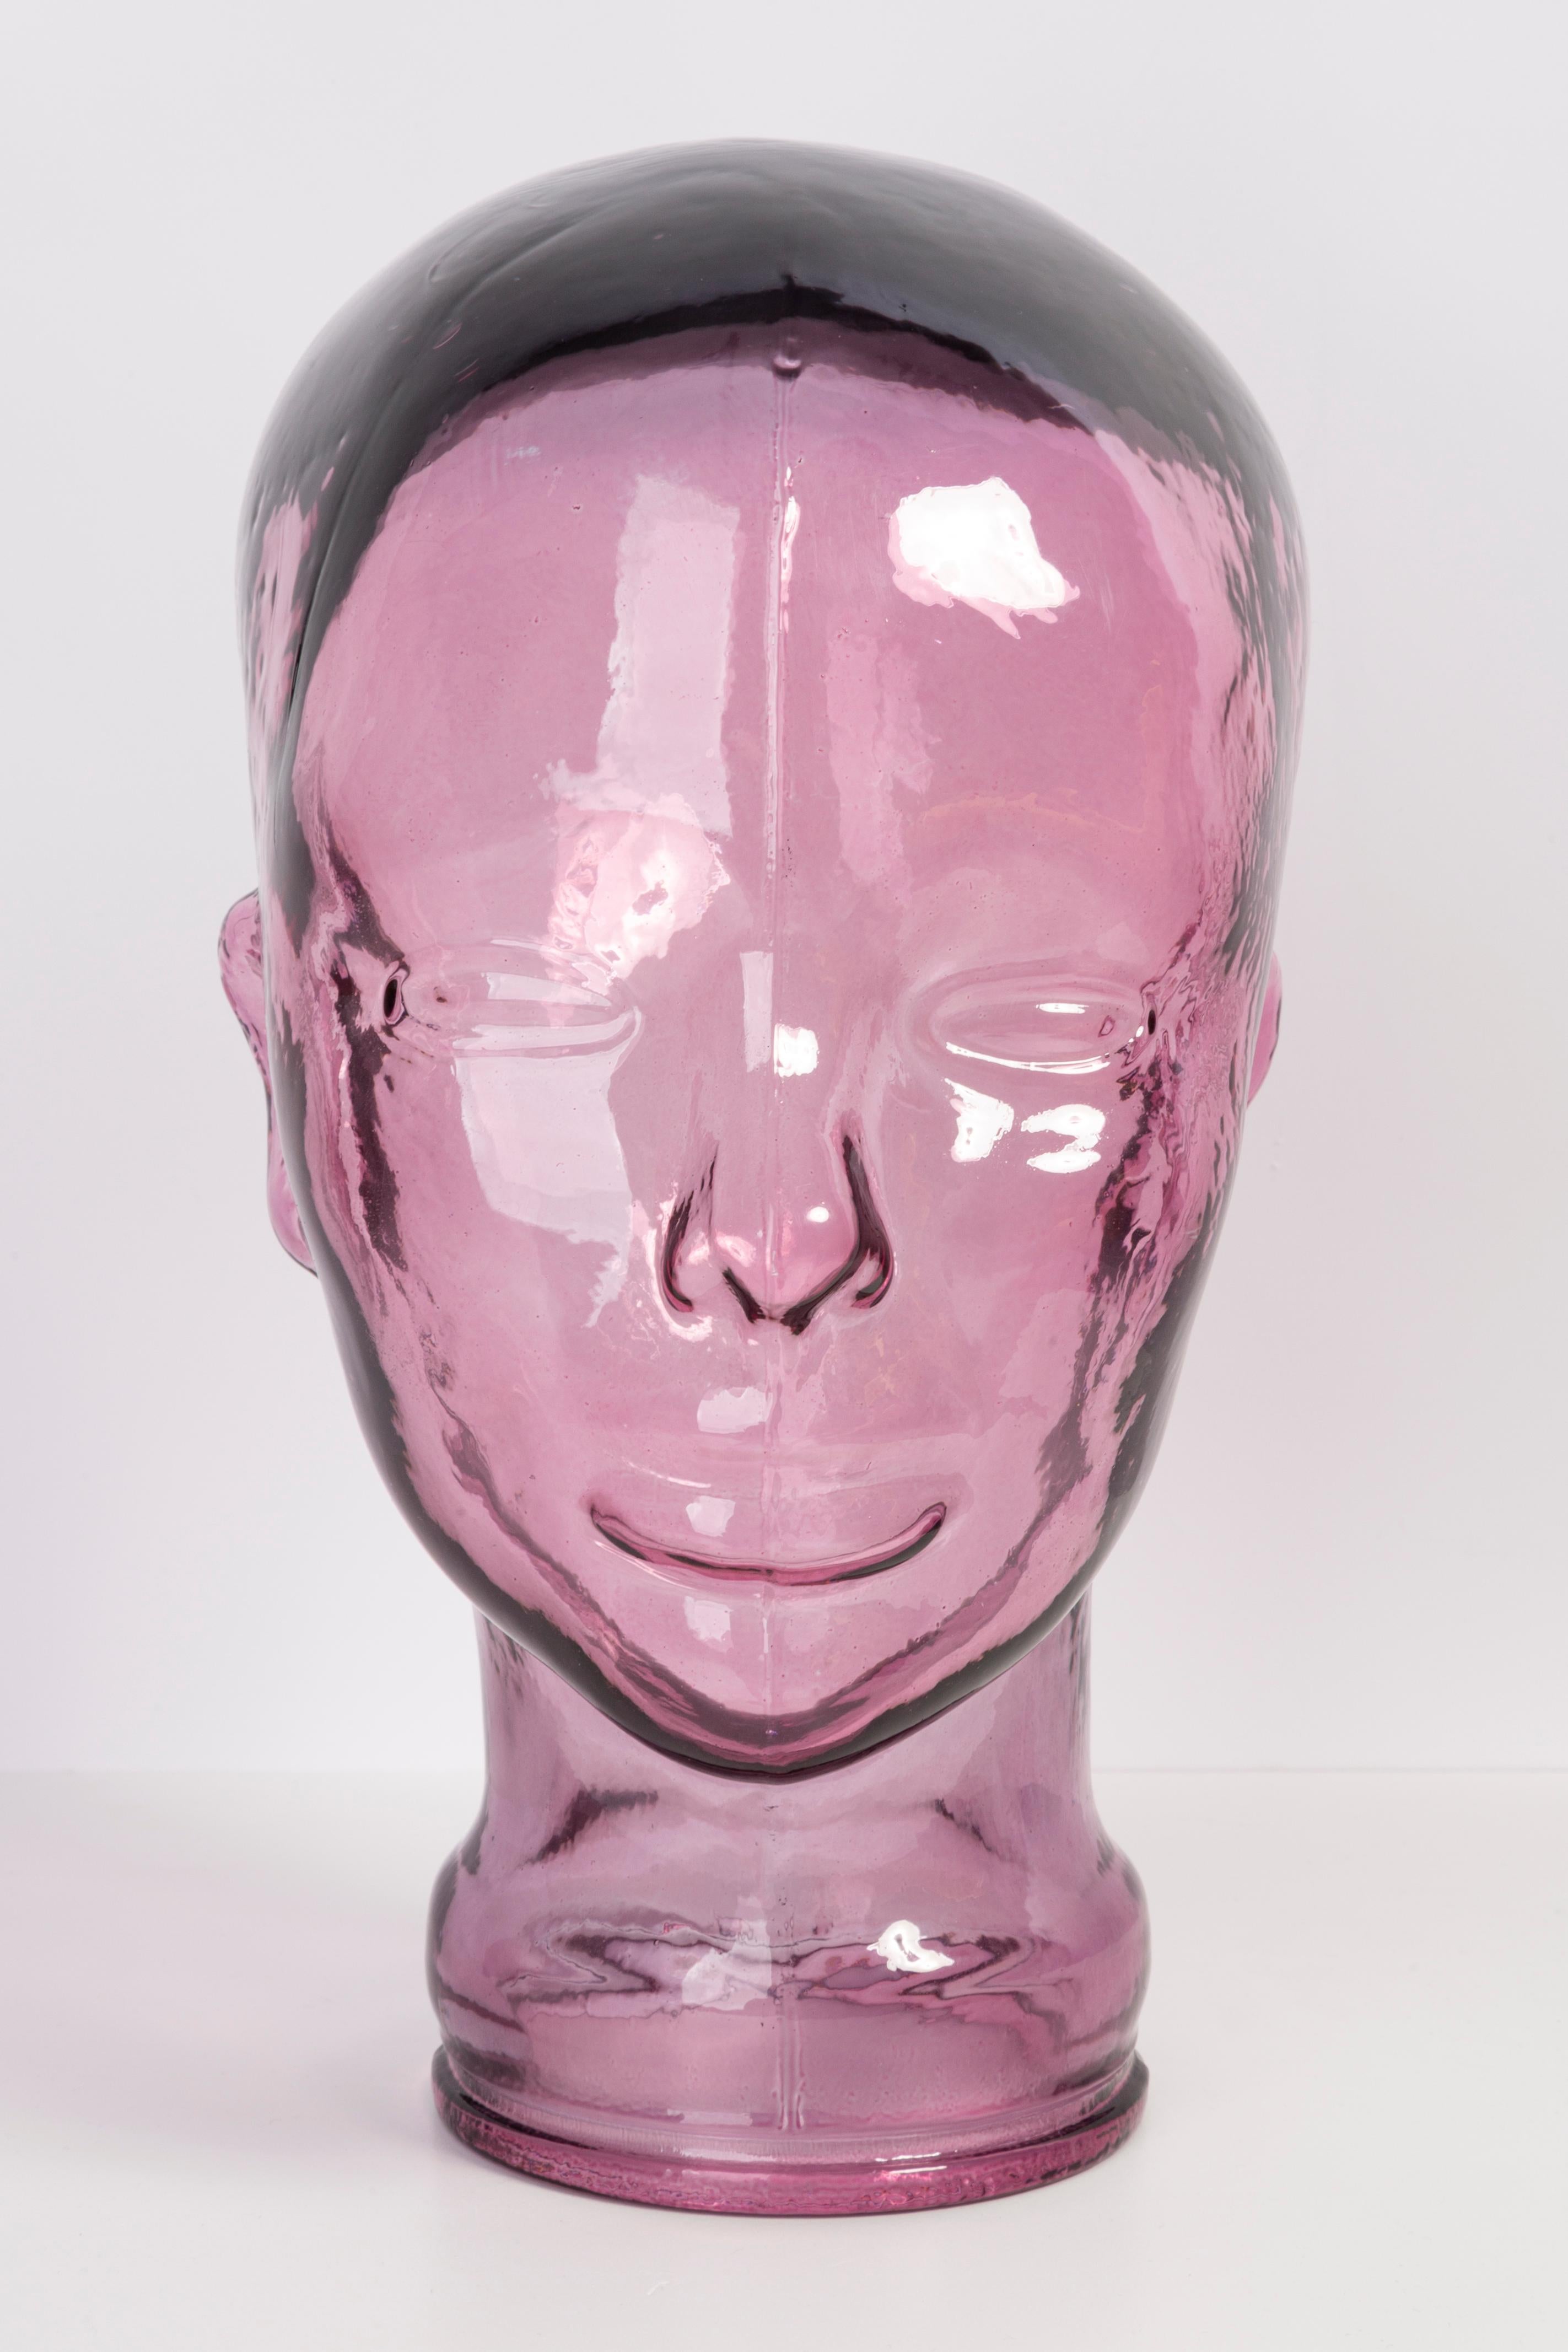 Life-size glass head in a unique light pink color. Produced in a German steelworks in the 1970s. Perfect condition. A perfect addition to the interior, photo prop, display or headphone stand.